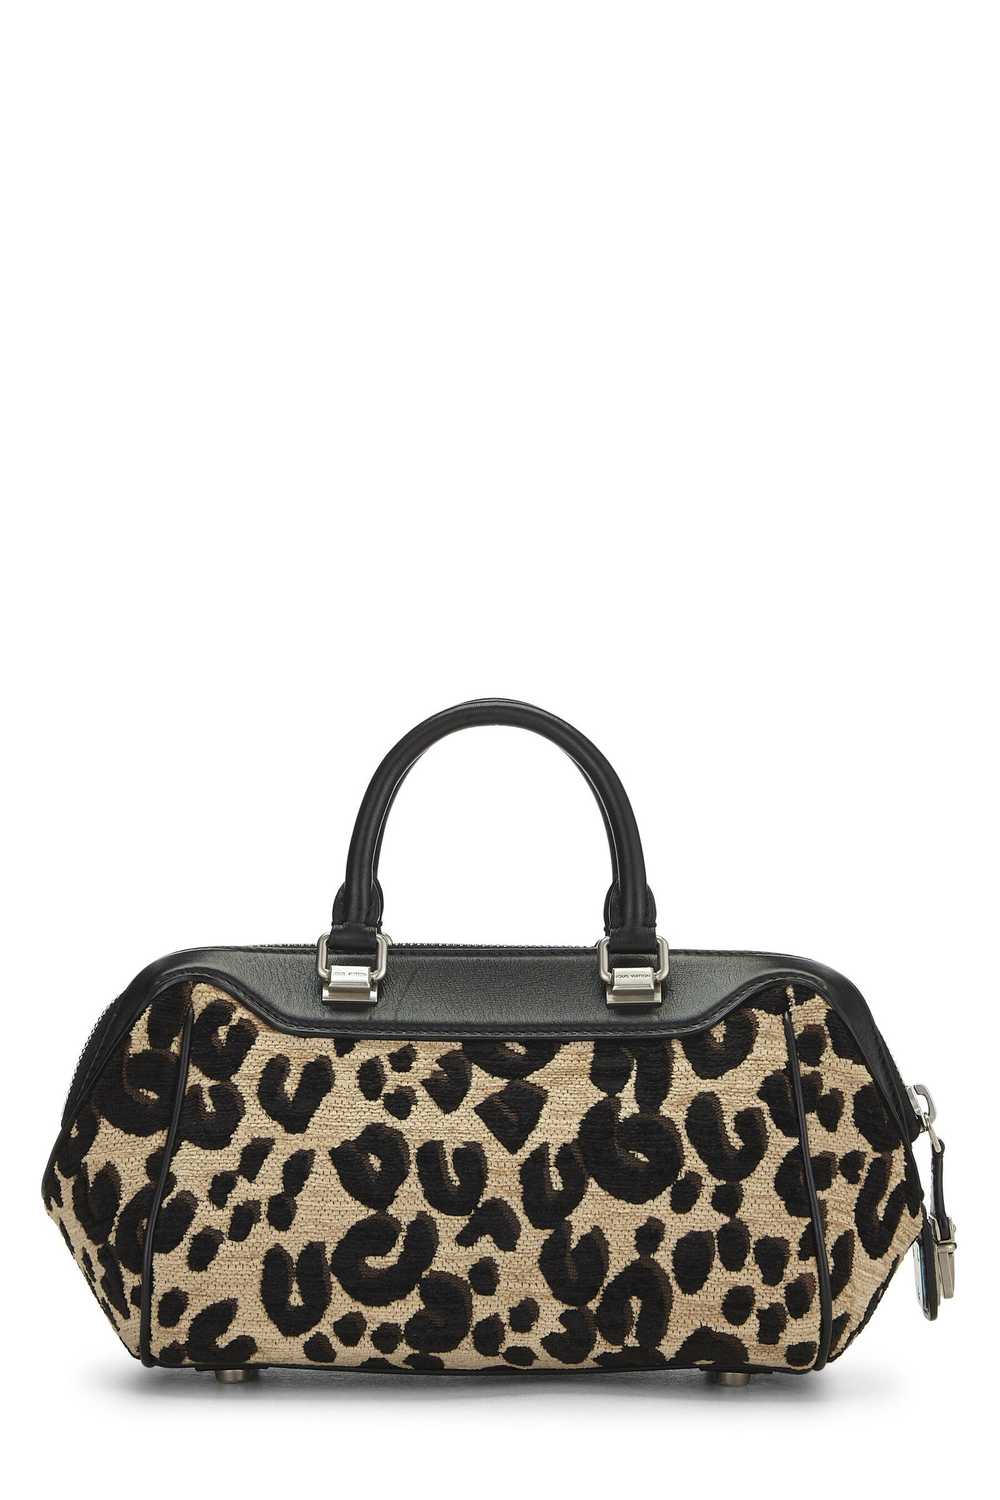 Stephen Sprouse x Louis Vuitton Leopard Baby - image 4